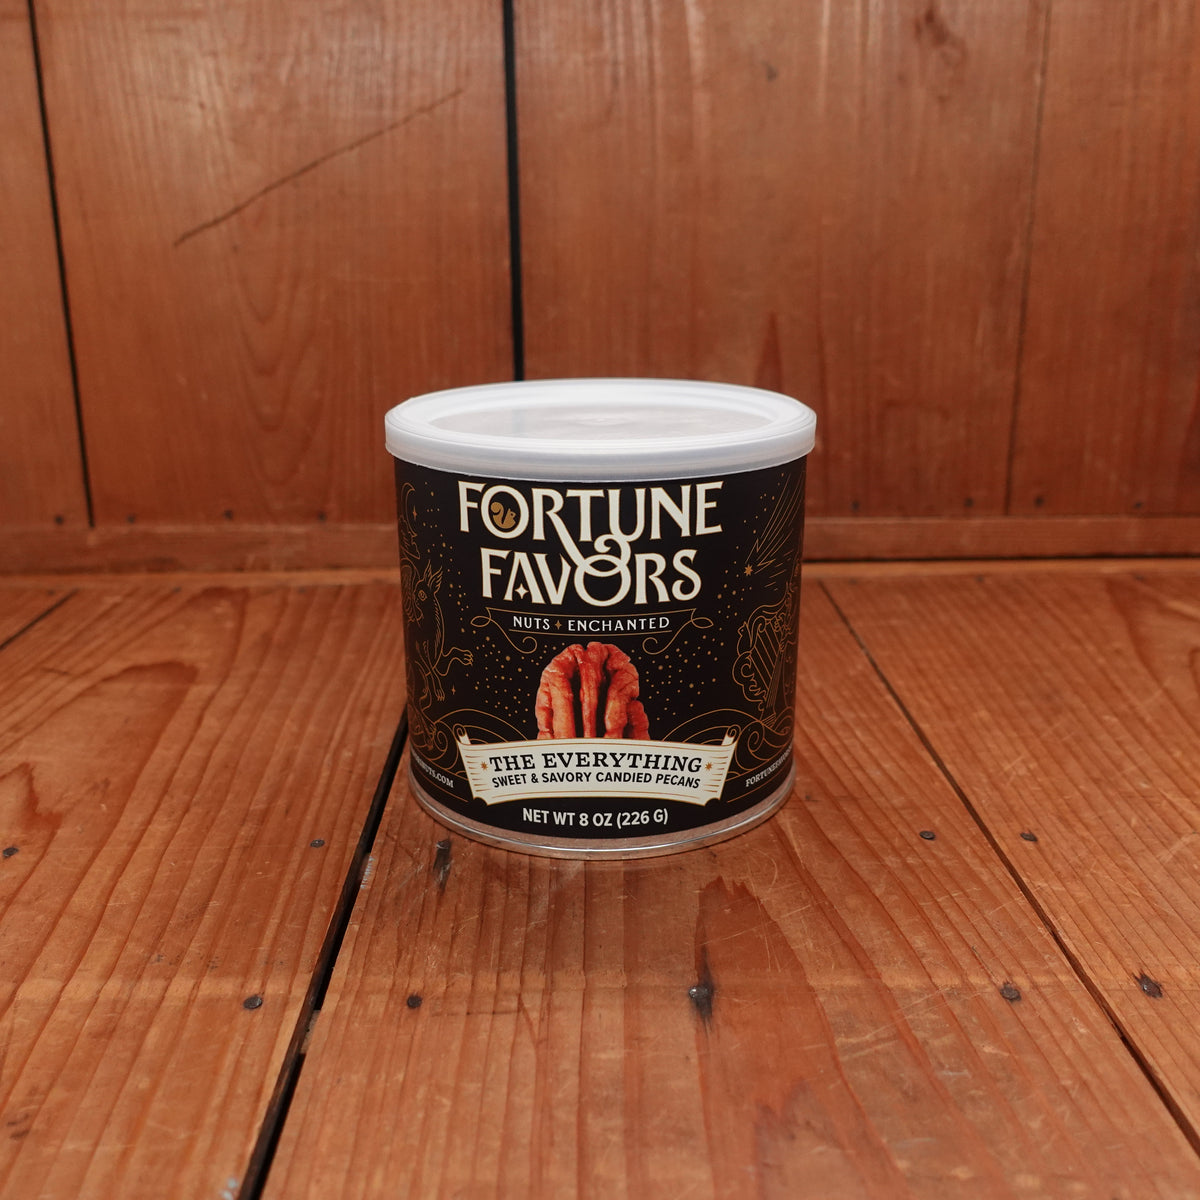 Fortune Favors The Everything Candied Pecans - 8oz